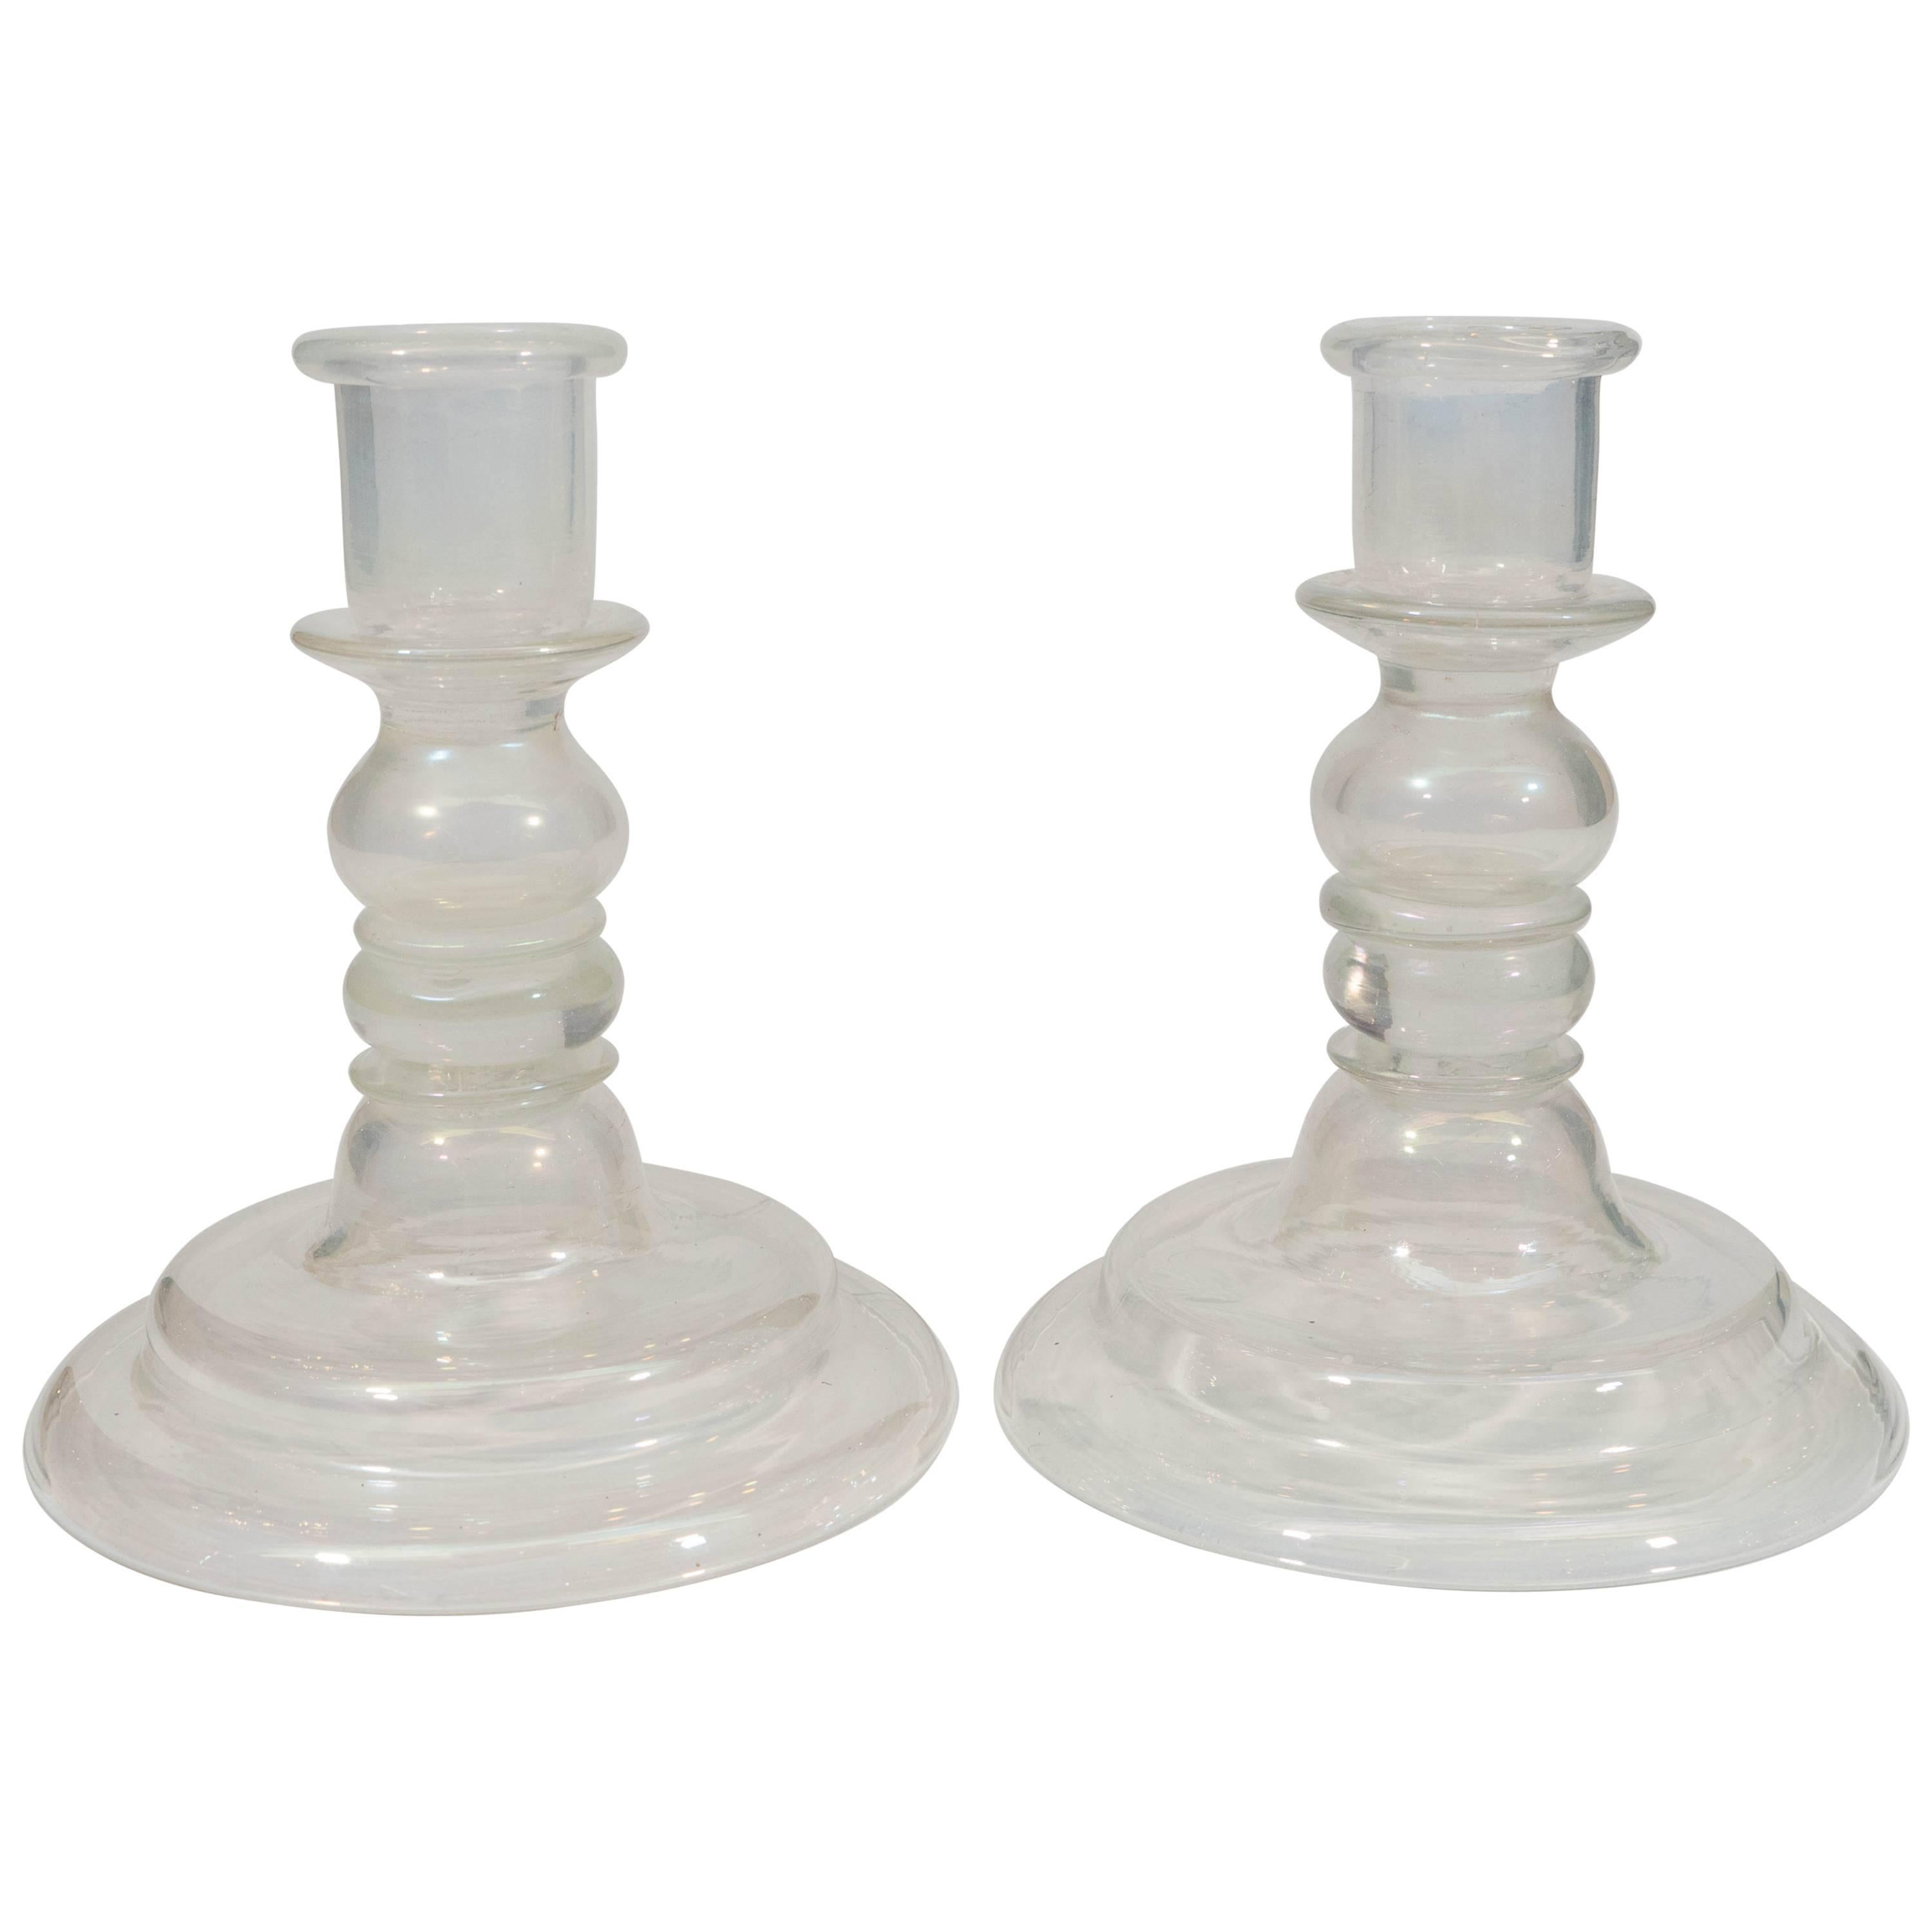 A Pair of Italian Glass Baluster Candle Holders For Sale